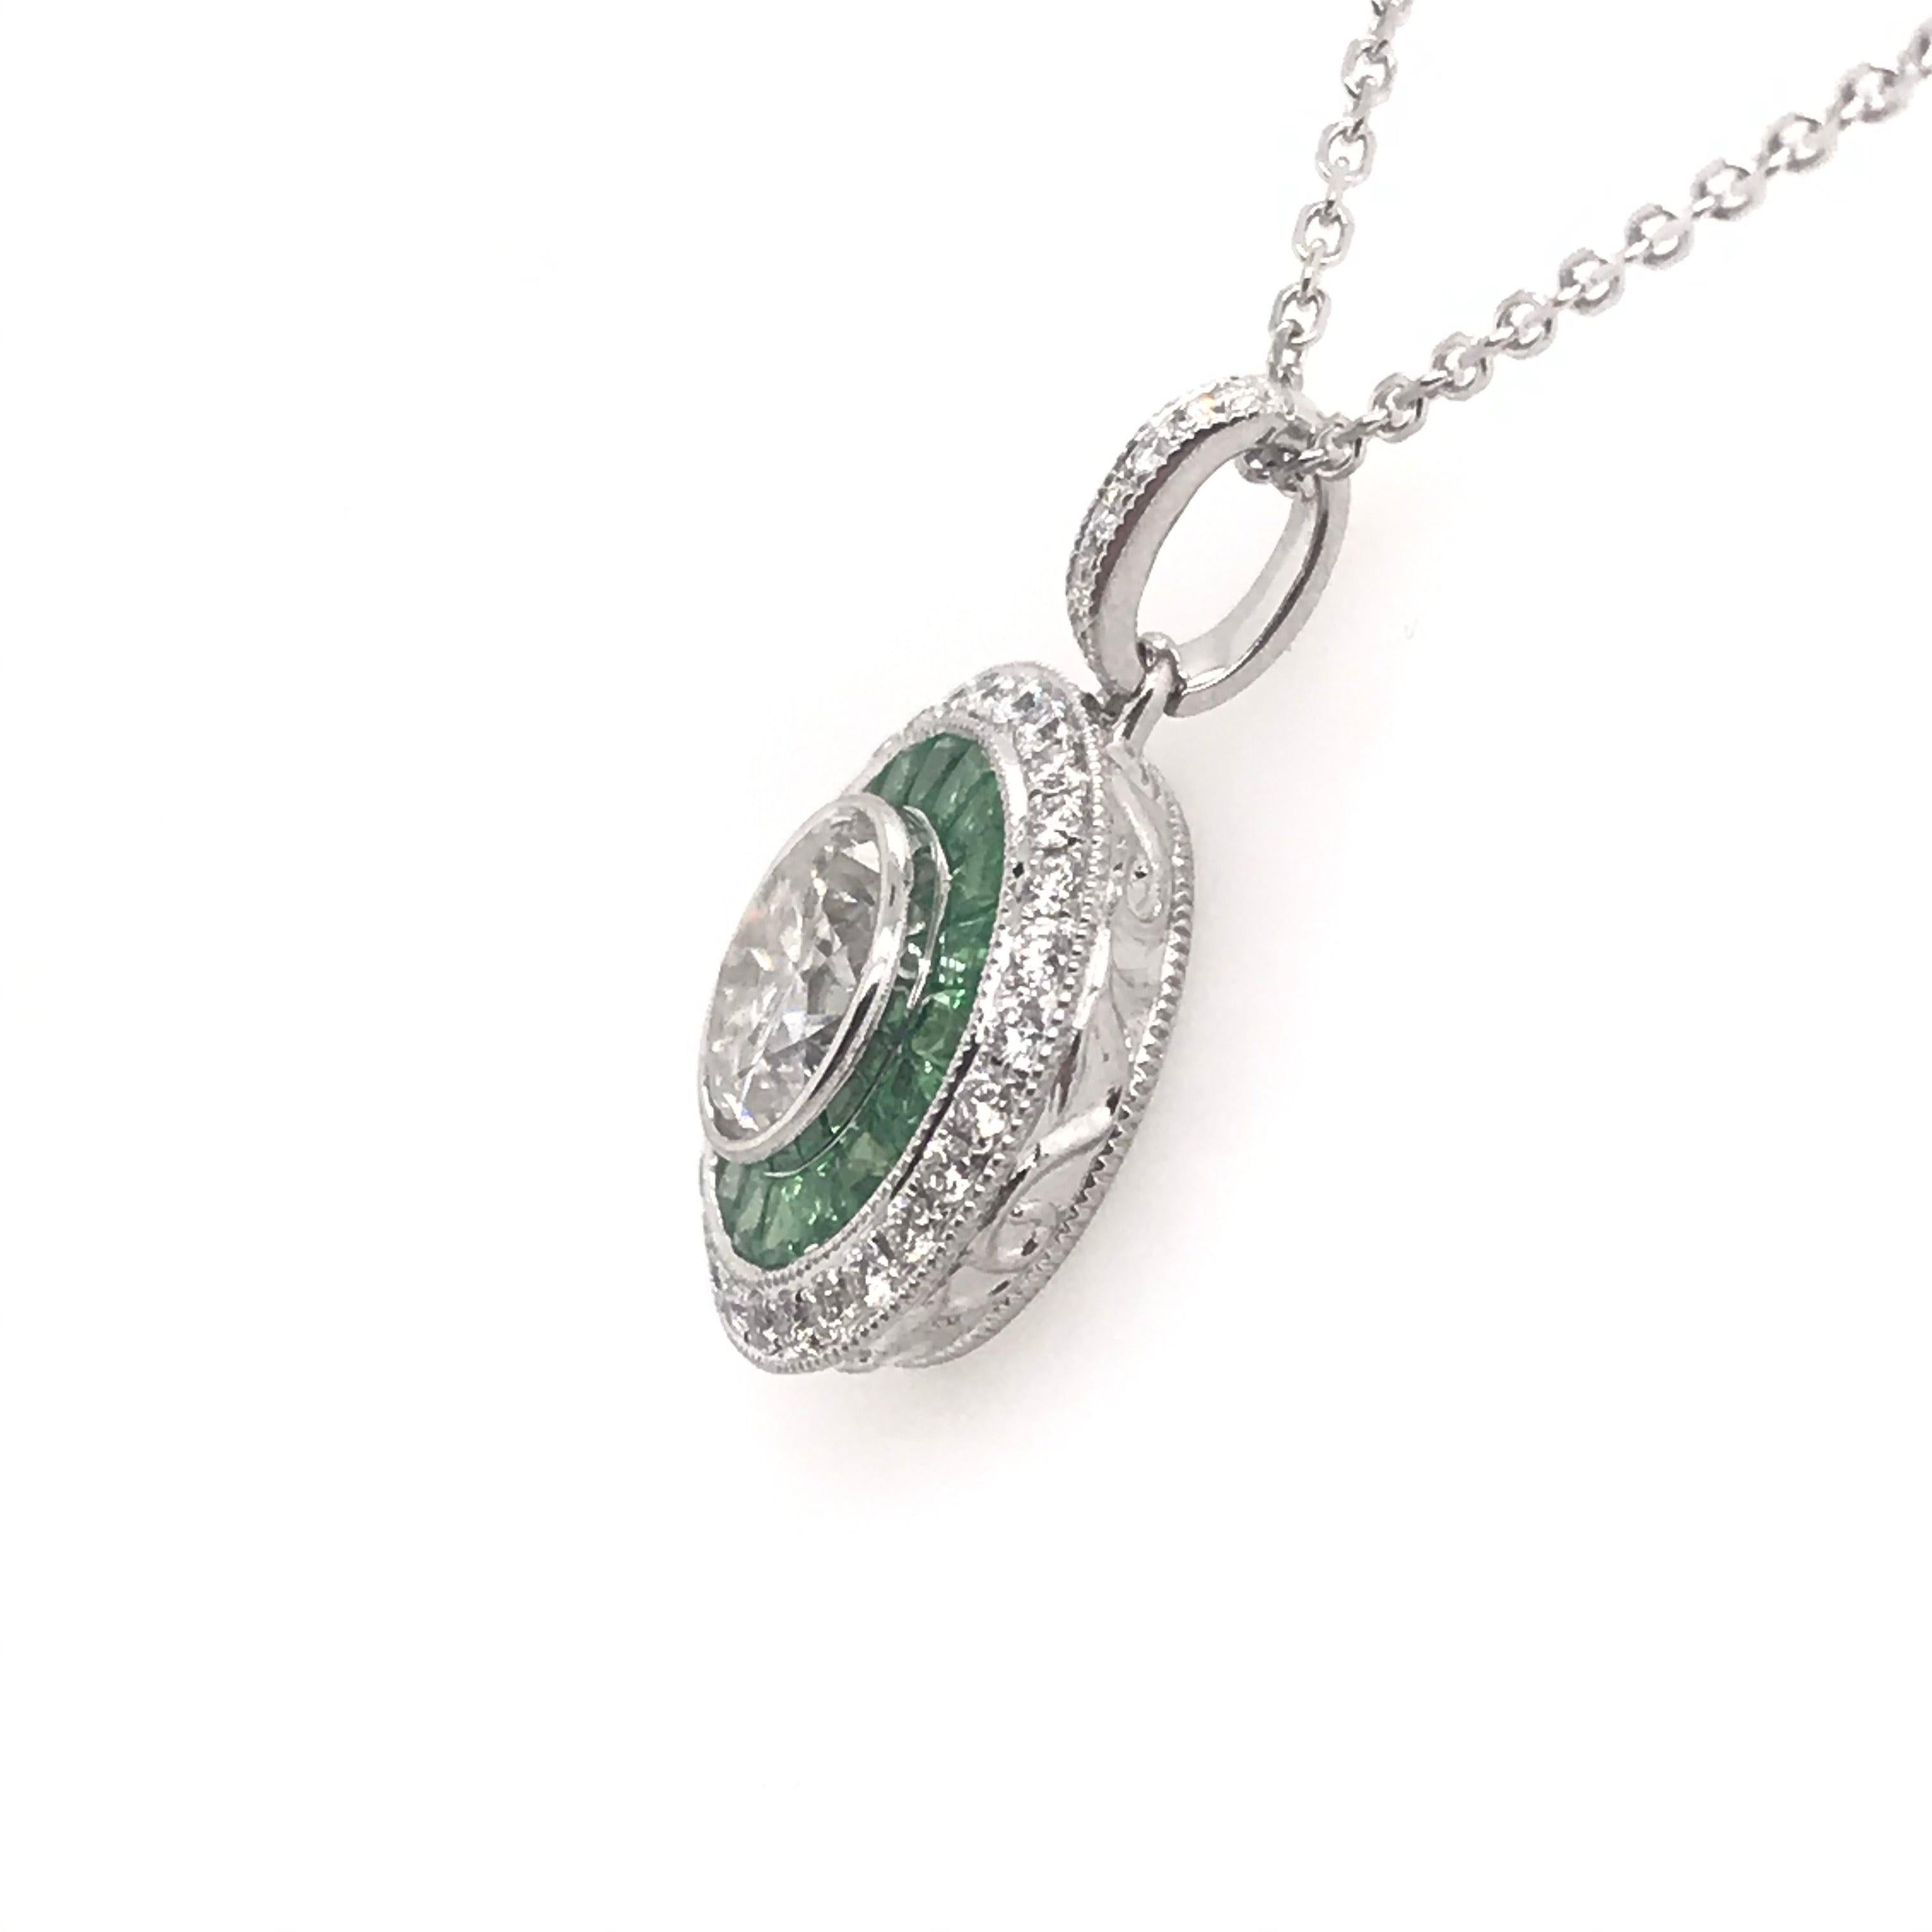 We love this antique reproduction style!

Crafted in 18K White gold, the beautiful pendant features a gorgeous 0.98 Carat Round Diamond, H Color I1 Clarity. Accenting the center stone are numerous french cut Tsavorite garnets and round diamonds.

We